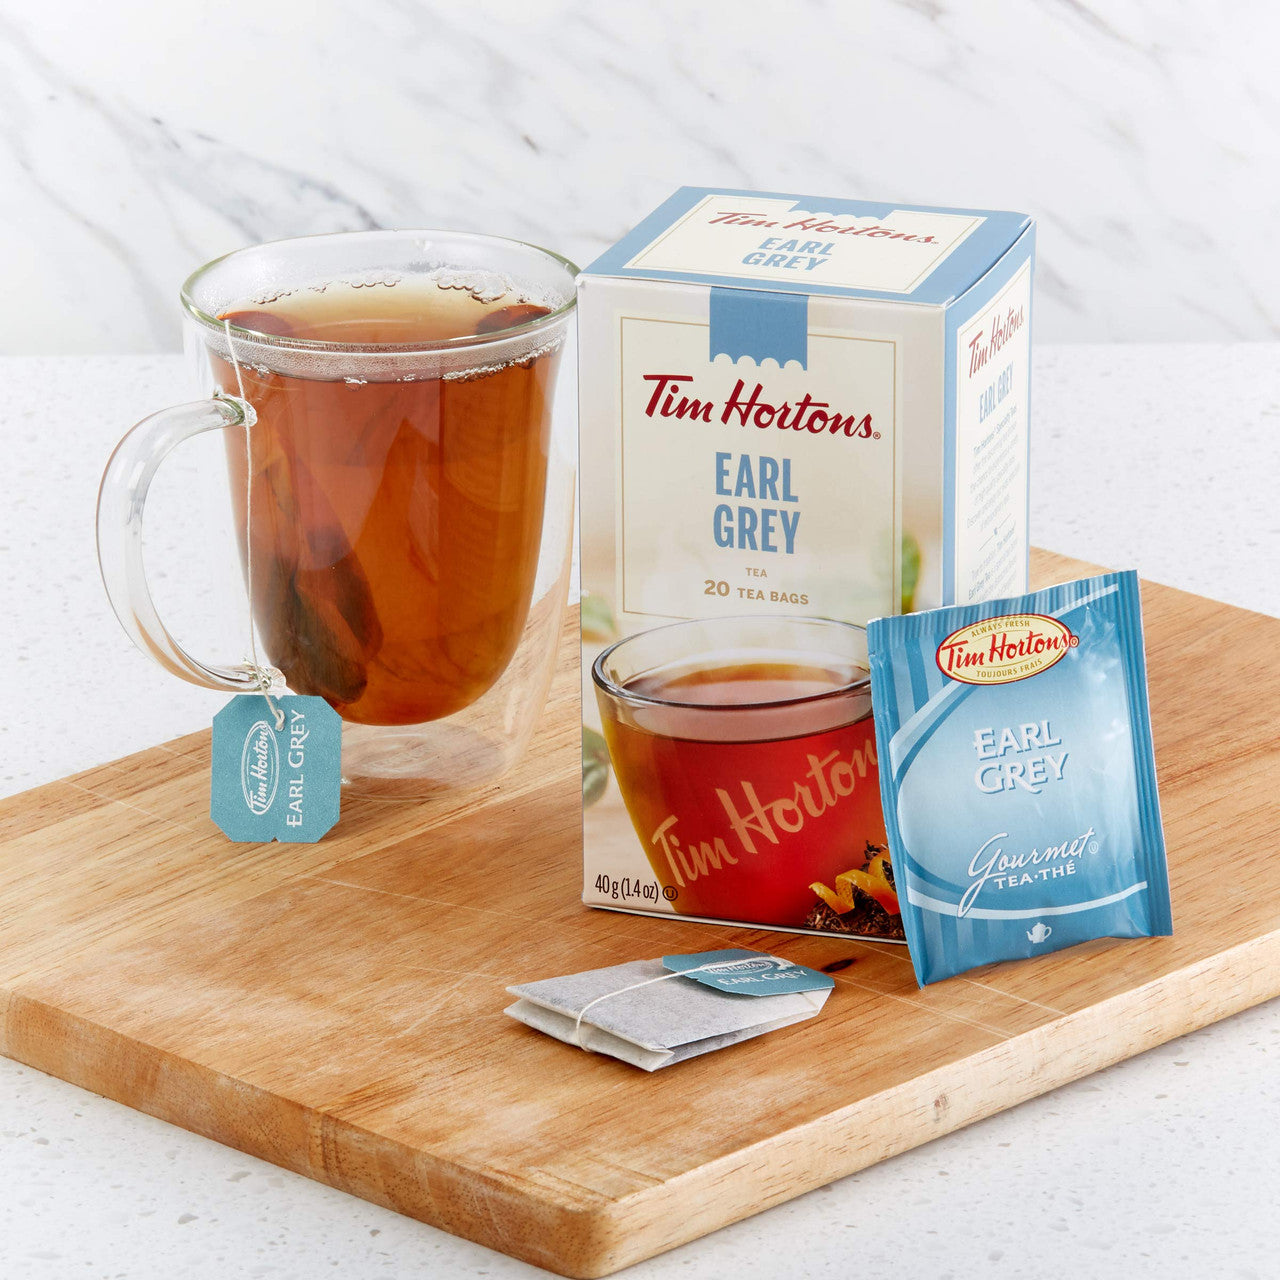 Tim Hortons Earl Grey Tea Bags, 20ct, 40g | 1.4oz {Imported from Canada}